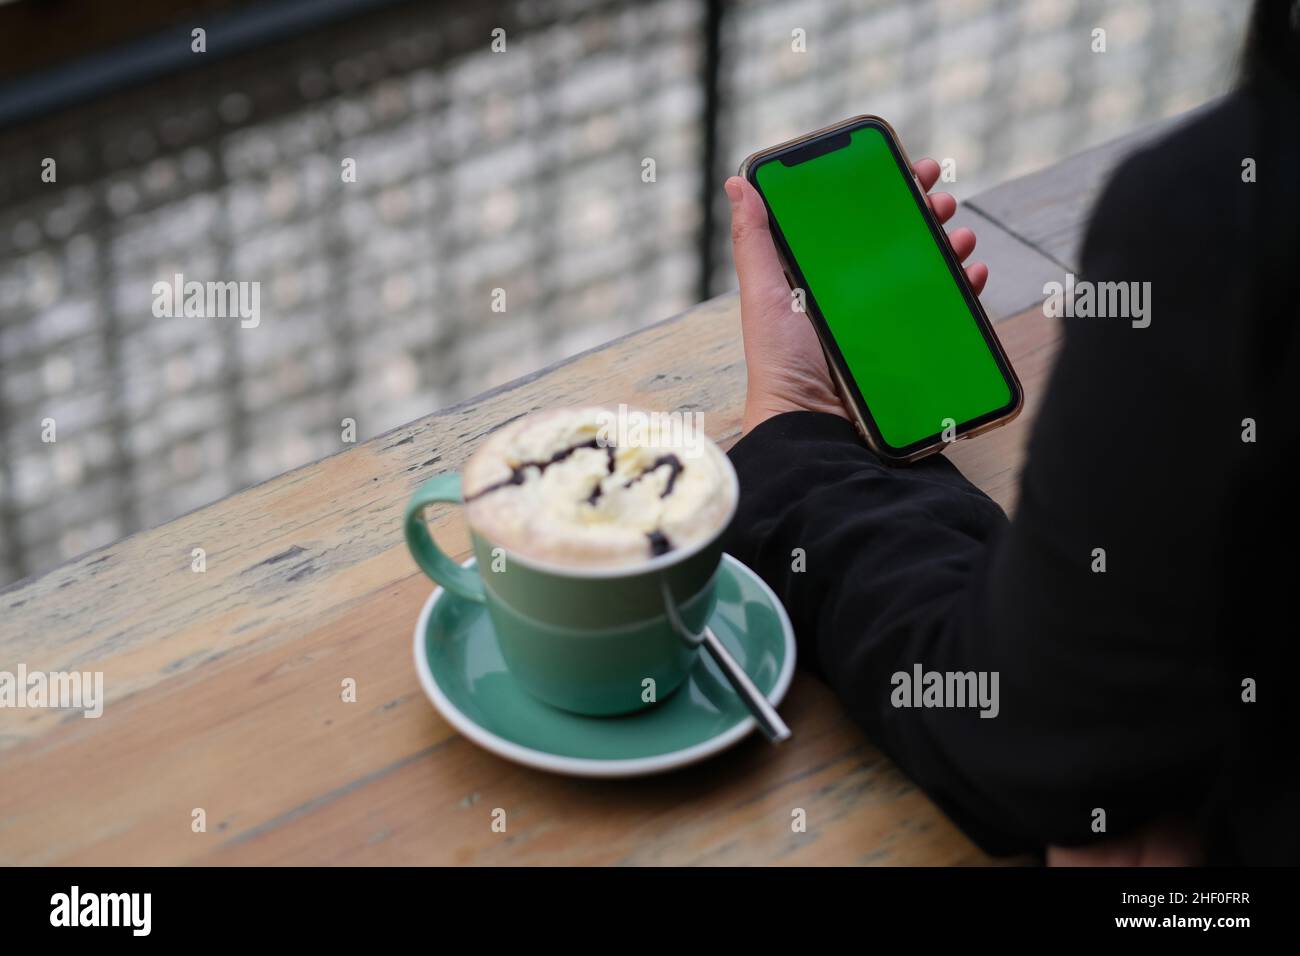 over shoulder view of hand holding green screen mobile phone. Cup of coffee on cafe table Stock Photo